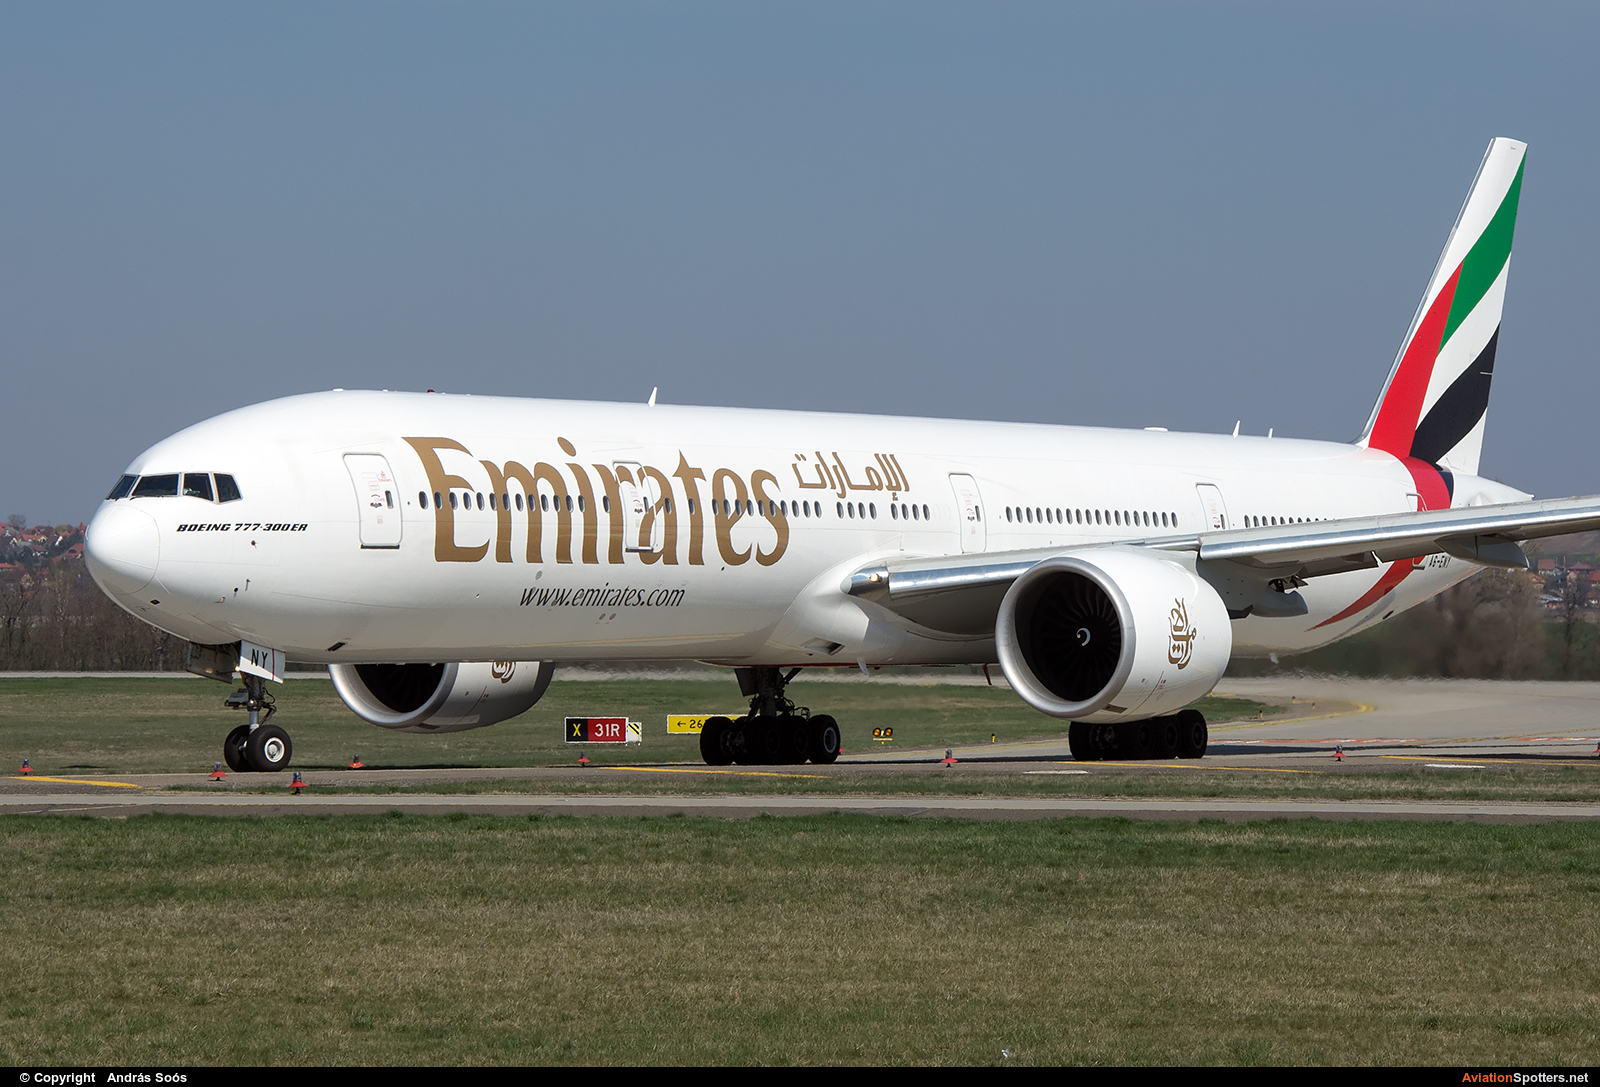 Emirates Airlines  -  777-300ER  (A6-ENY) By András Soós (sas1965)